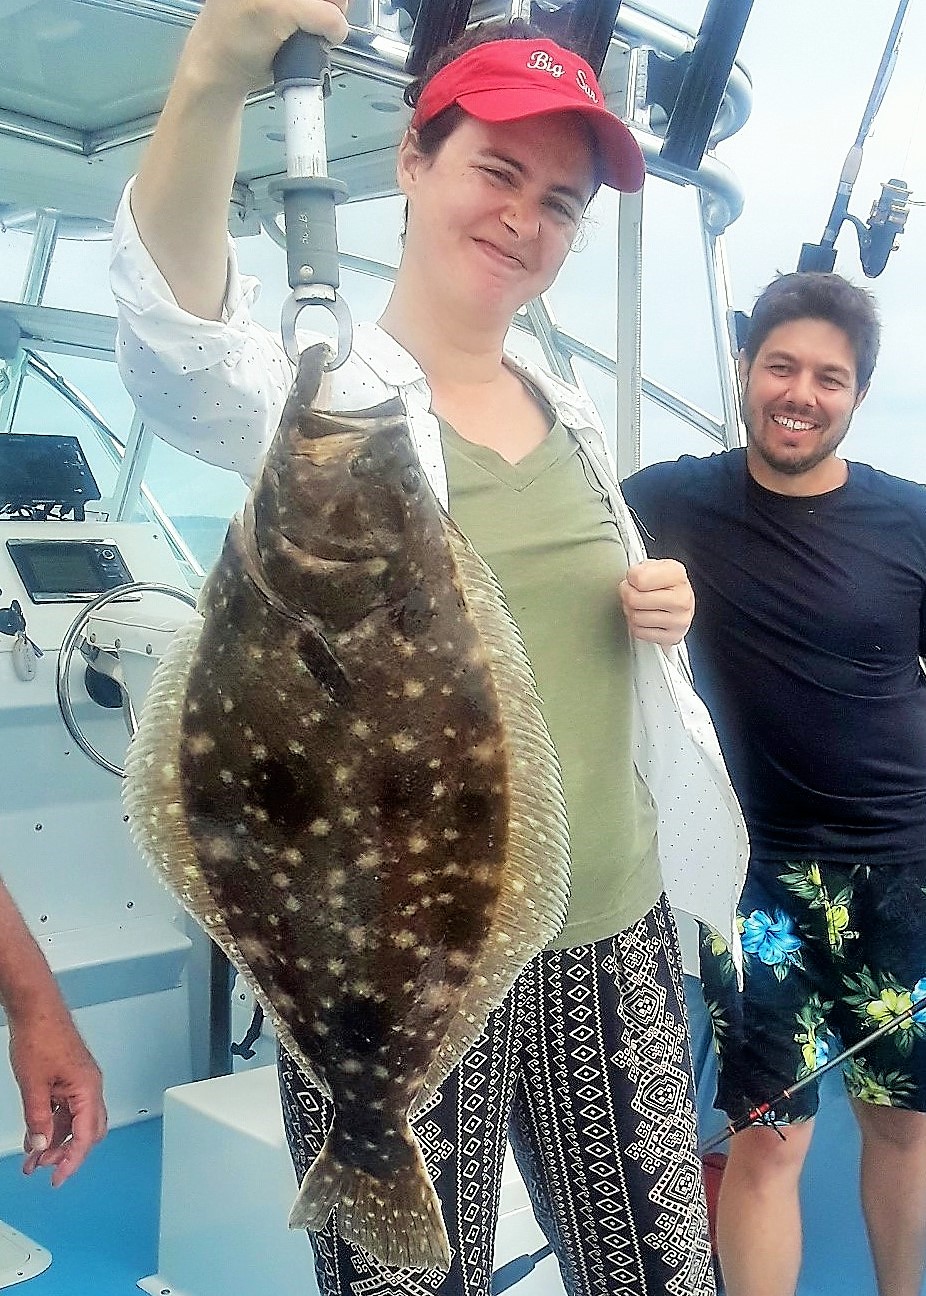 Lucy Churchill with a 24” summer flounder (fluke) she caught off Rhode Island this summer. Fluke stock is in a slump coastwise, however, scientists say the biomass has moved north.